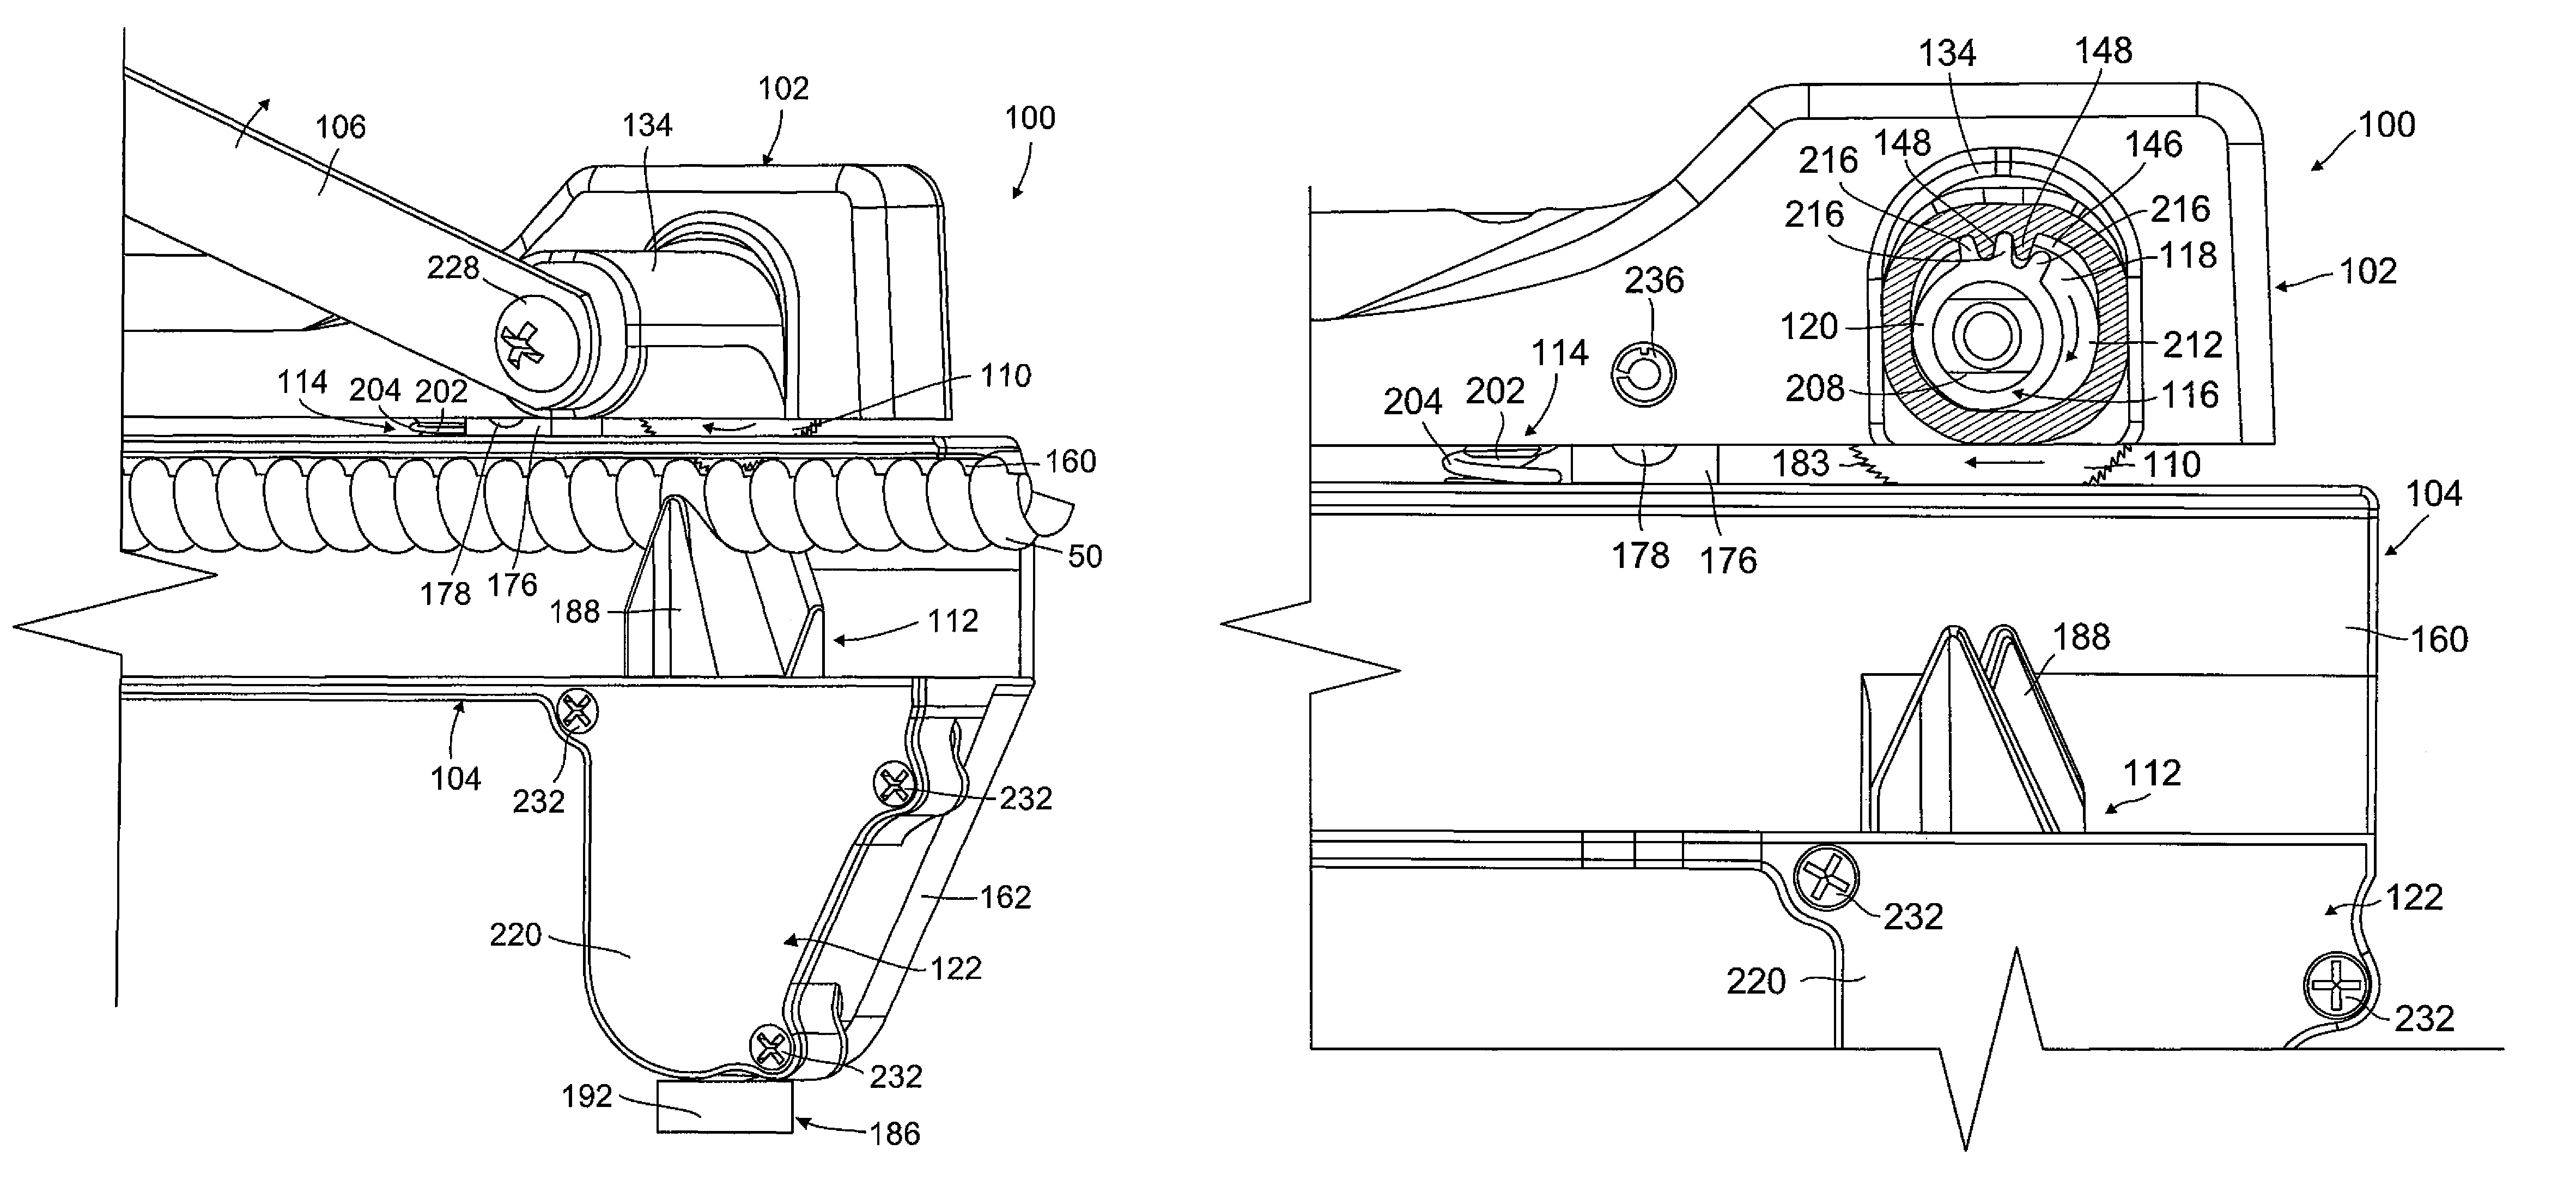 Cable cutter with reciprocating cutting wheel for cutting flexible cable